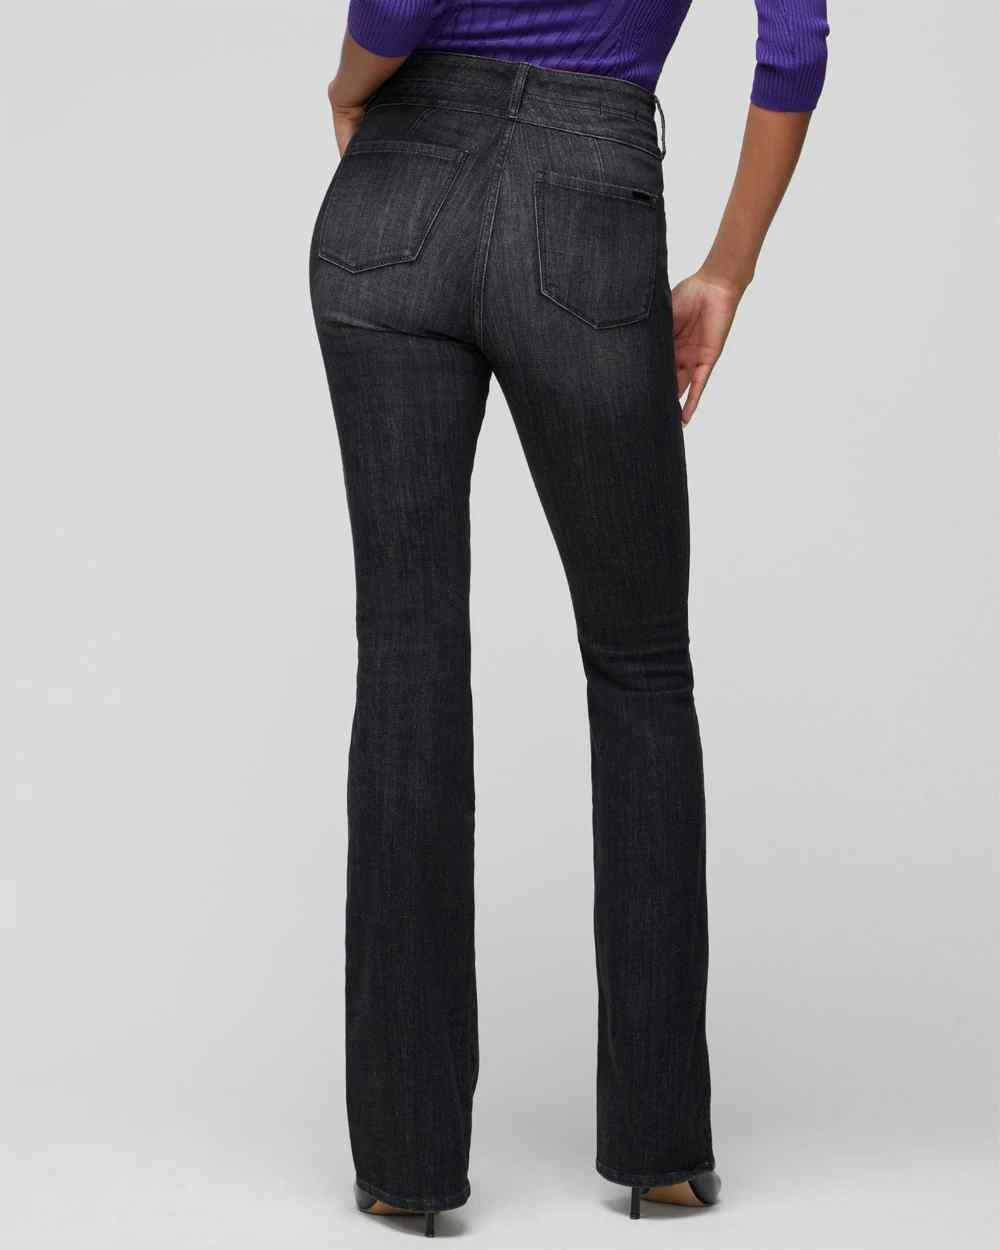 Extra-High Rise Pintuck Skinny Flare Jeans | White House Black Market